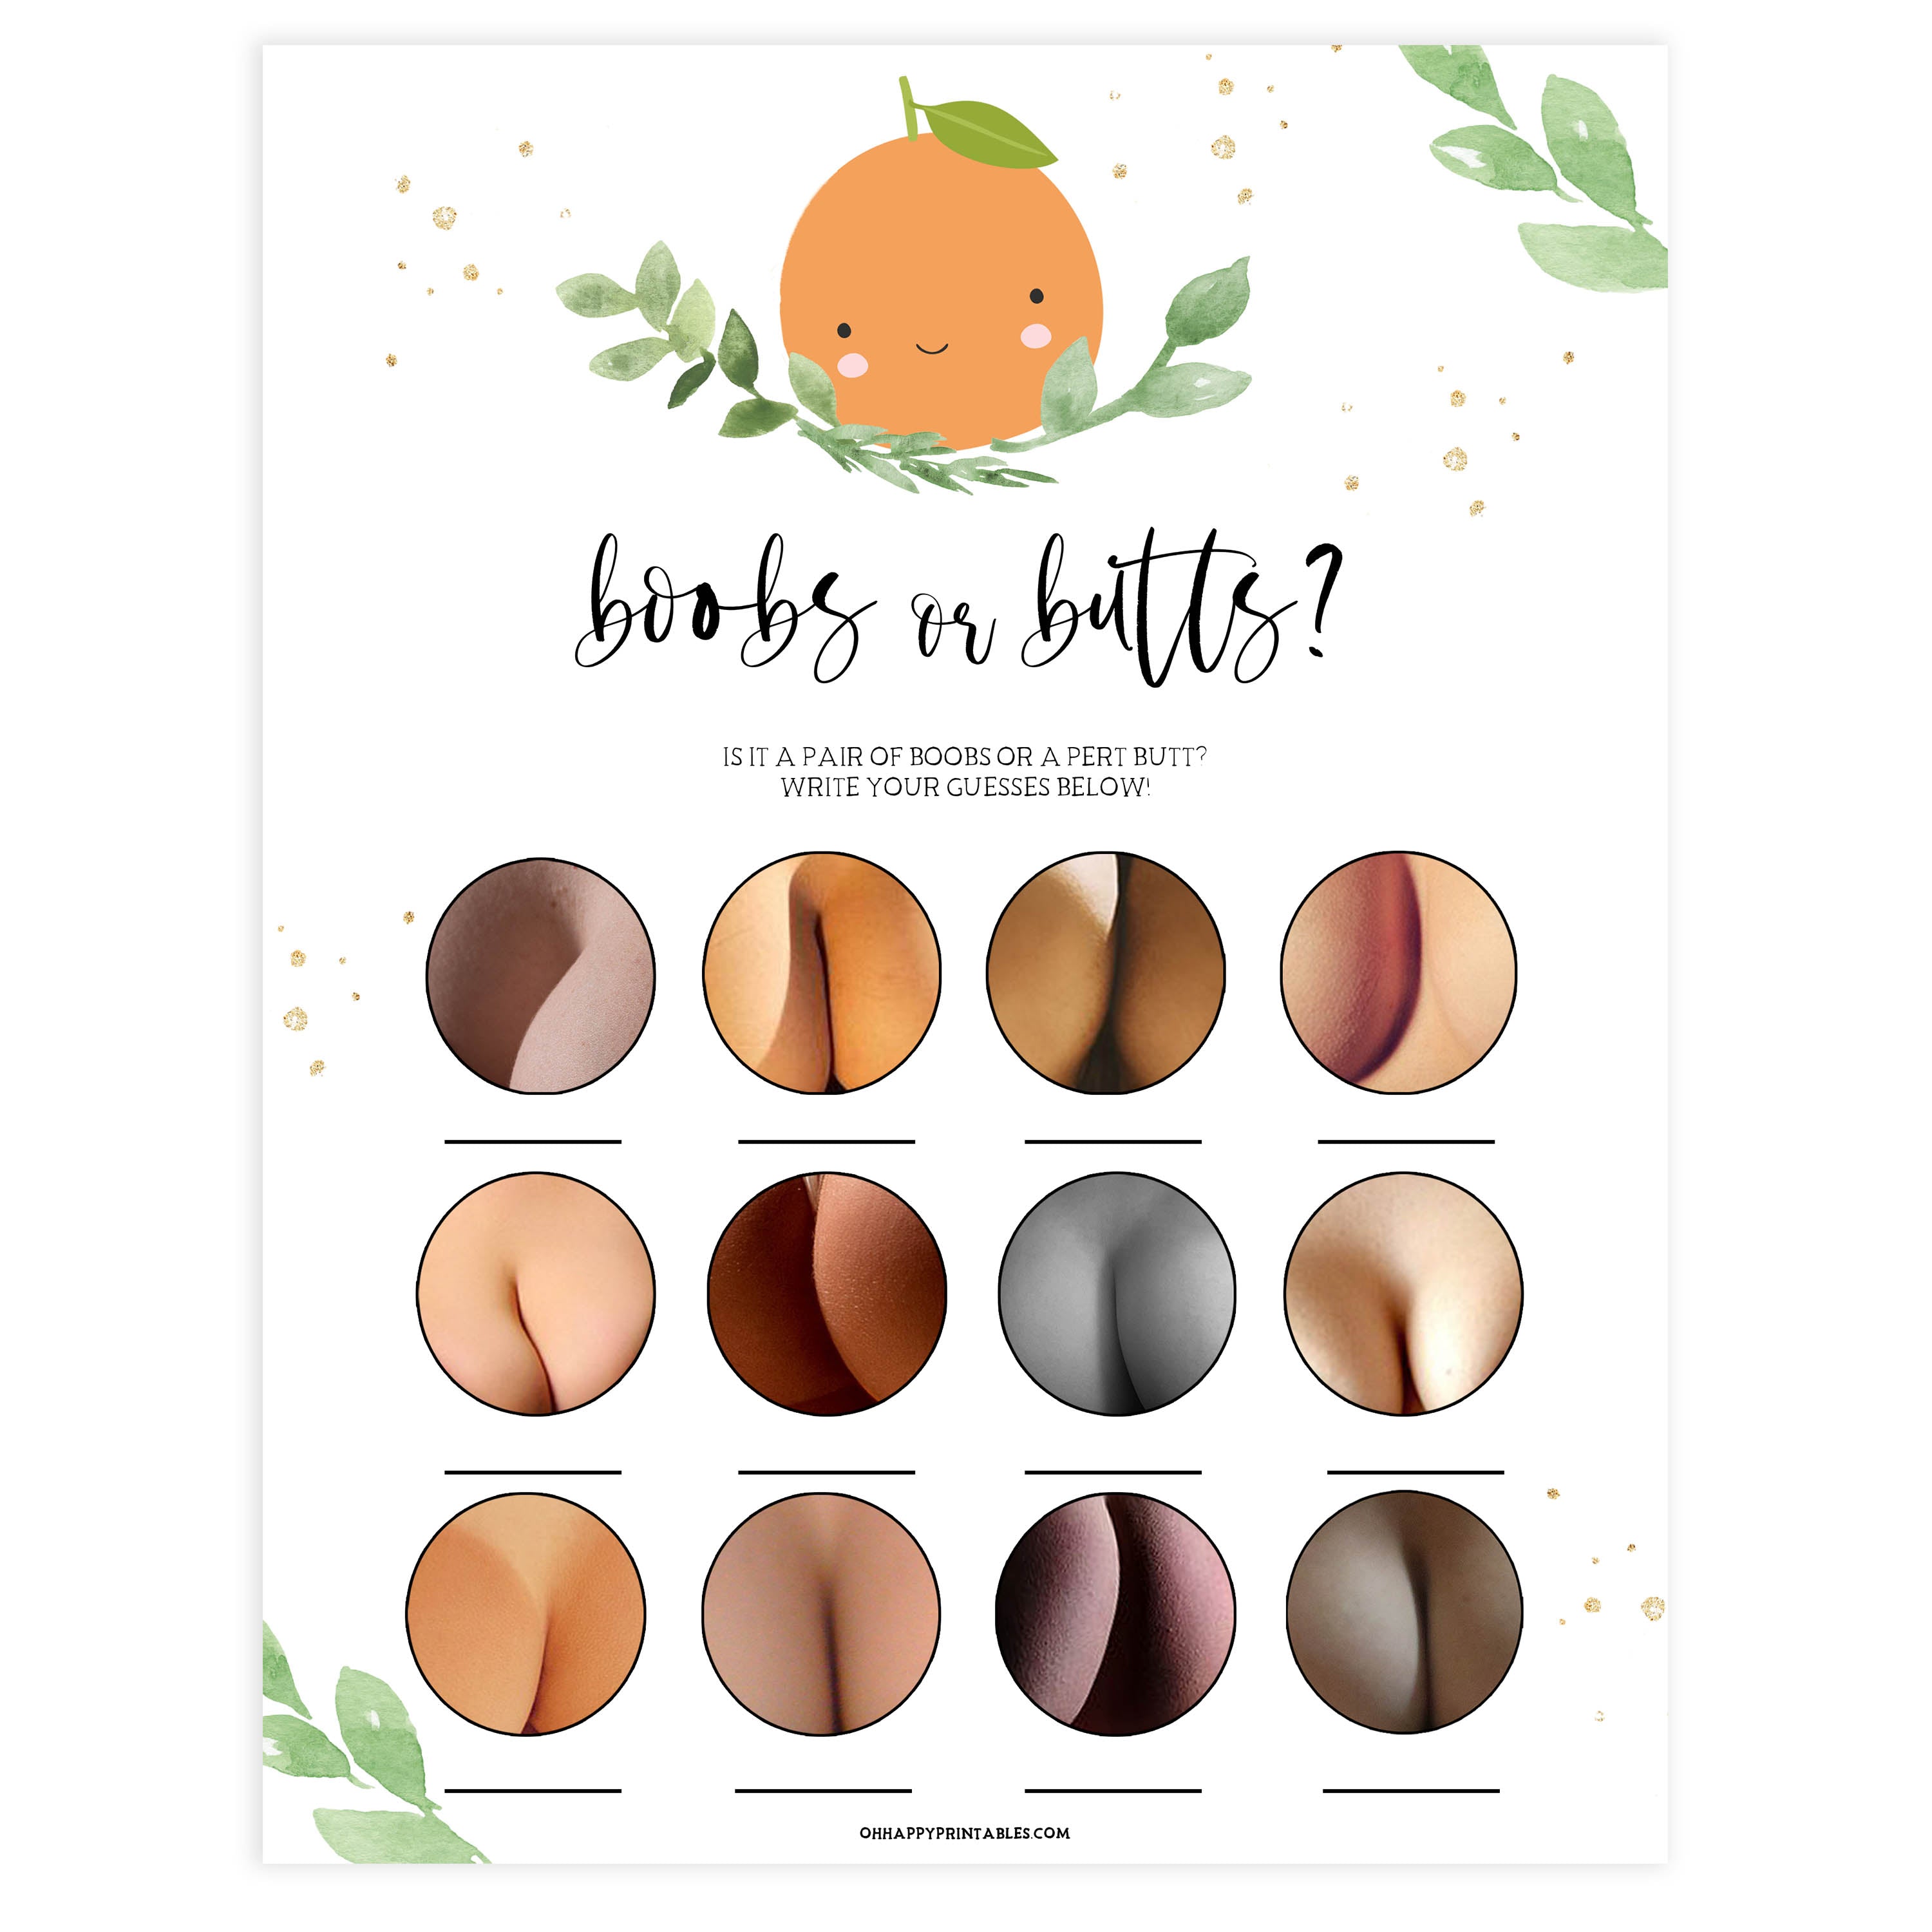 boobs or butts baby shower game, Printable baby shower games, little cutie baby games, baby shower games, fun baby shower ideas, top baby shower ideas, little cutie baby shower, baby shower games, fun little cutie baby shower ideas